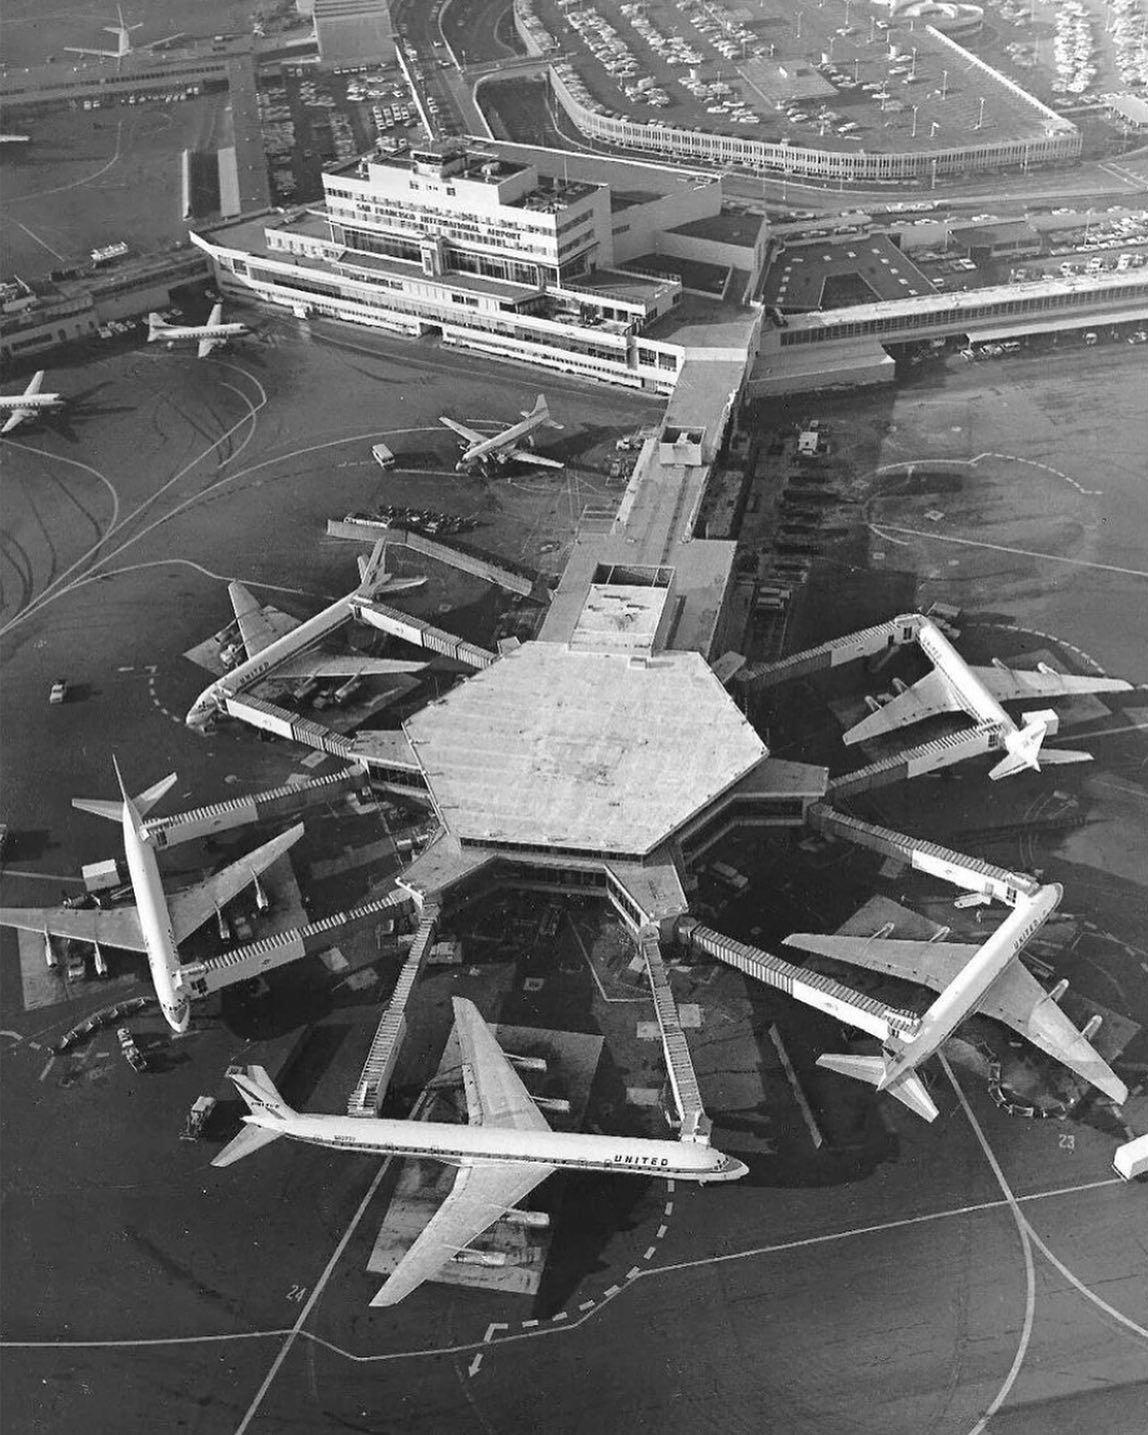 DC-8s at the gate at SFO in the 1960s